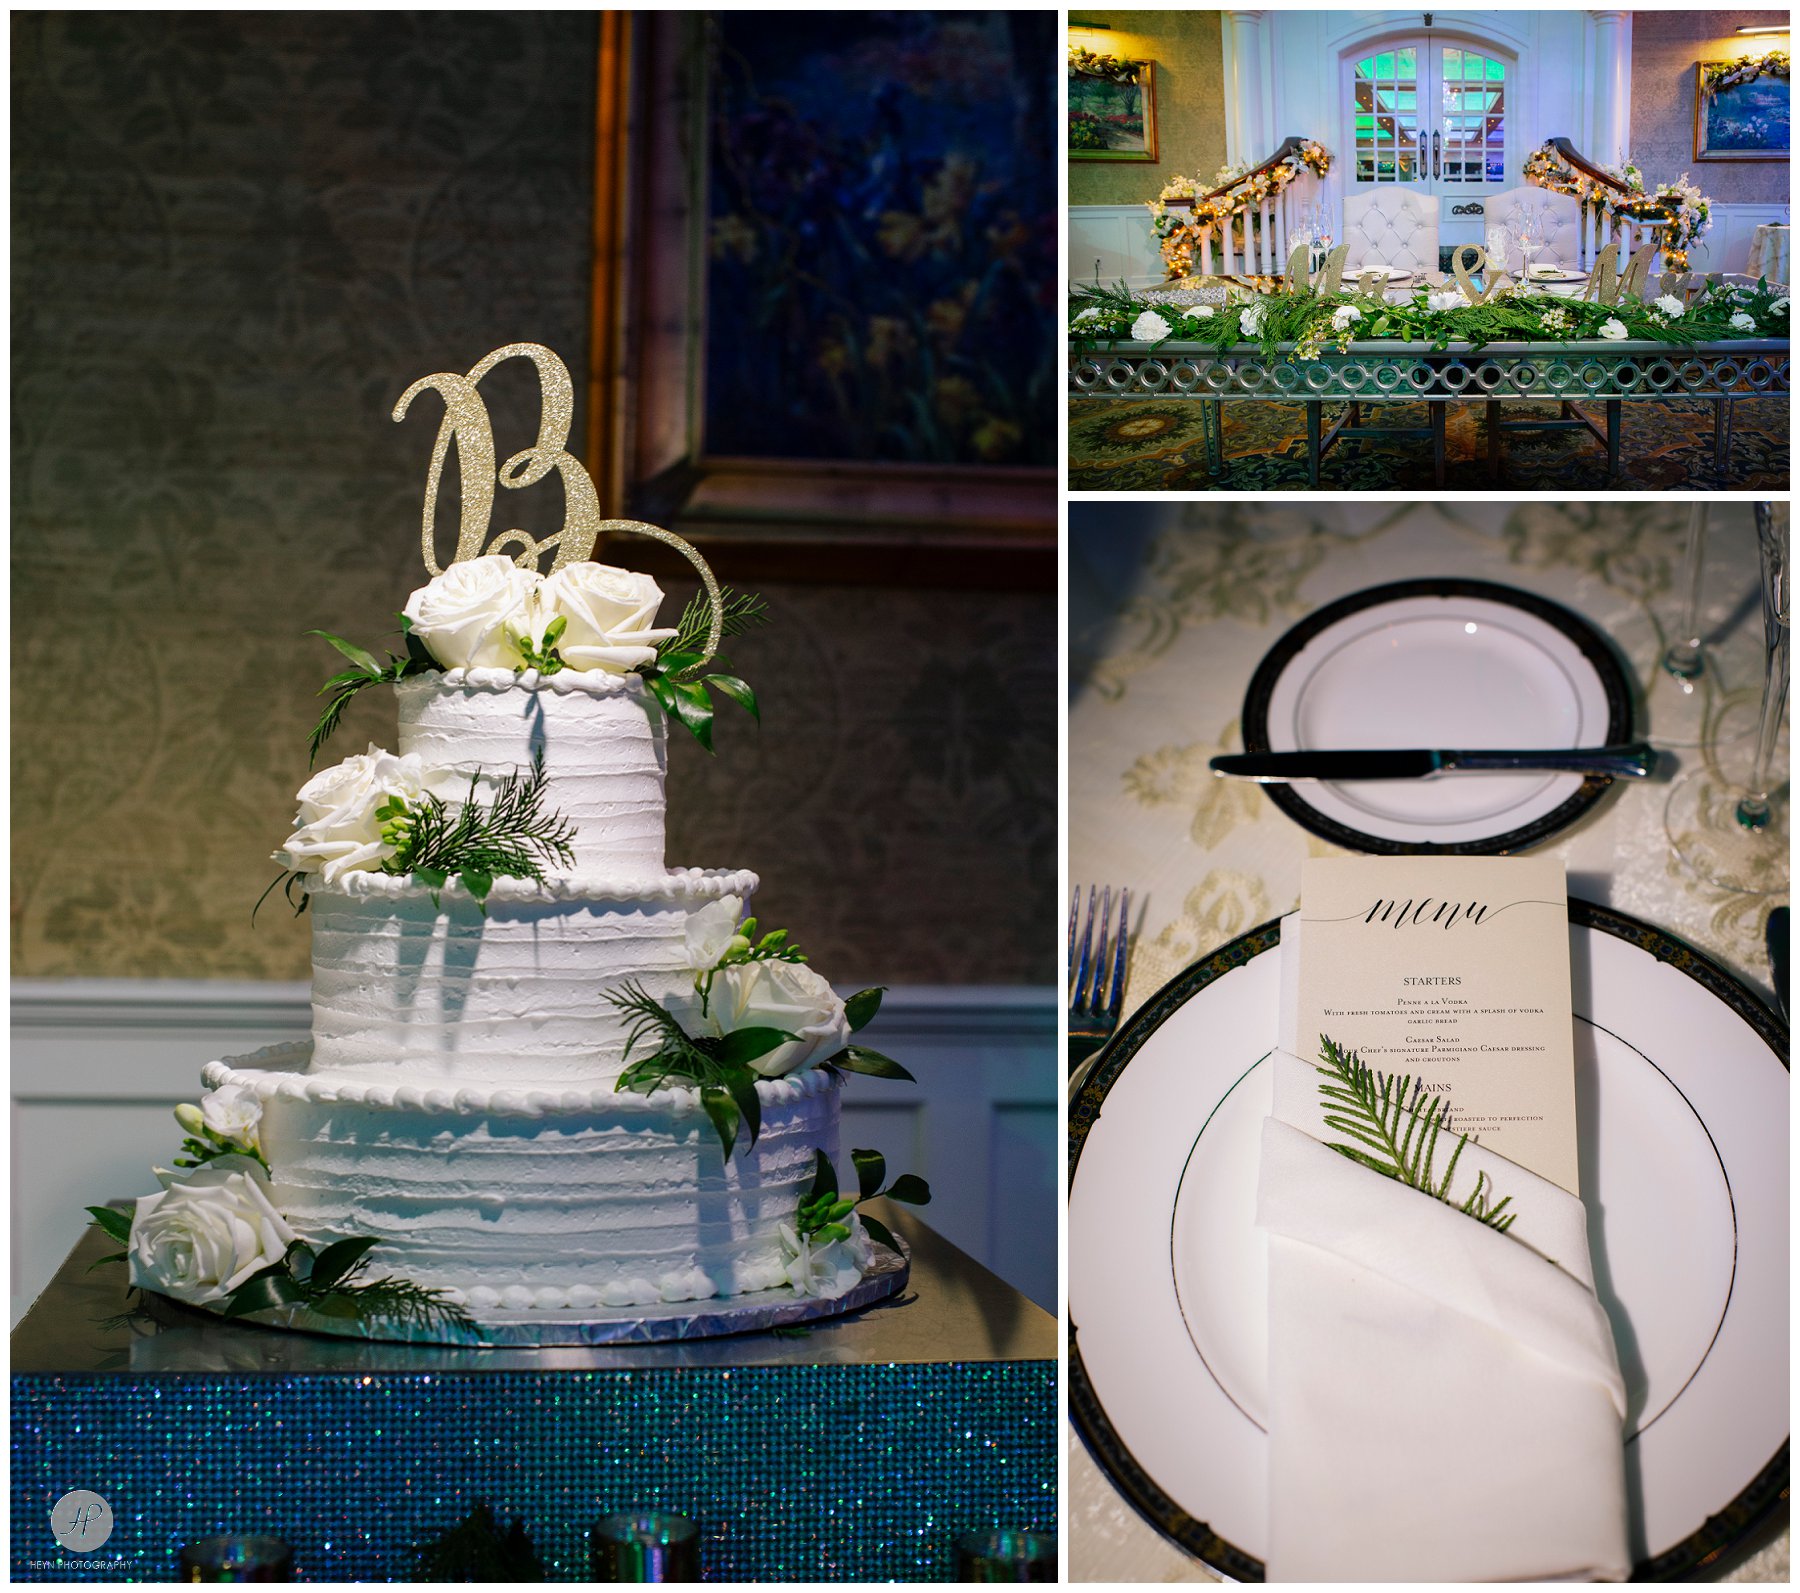 reception details and wedding cake at clarks landing yacht club wedding